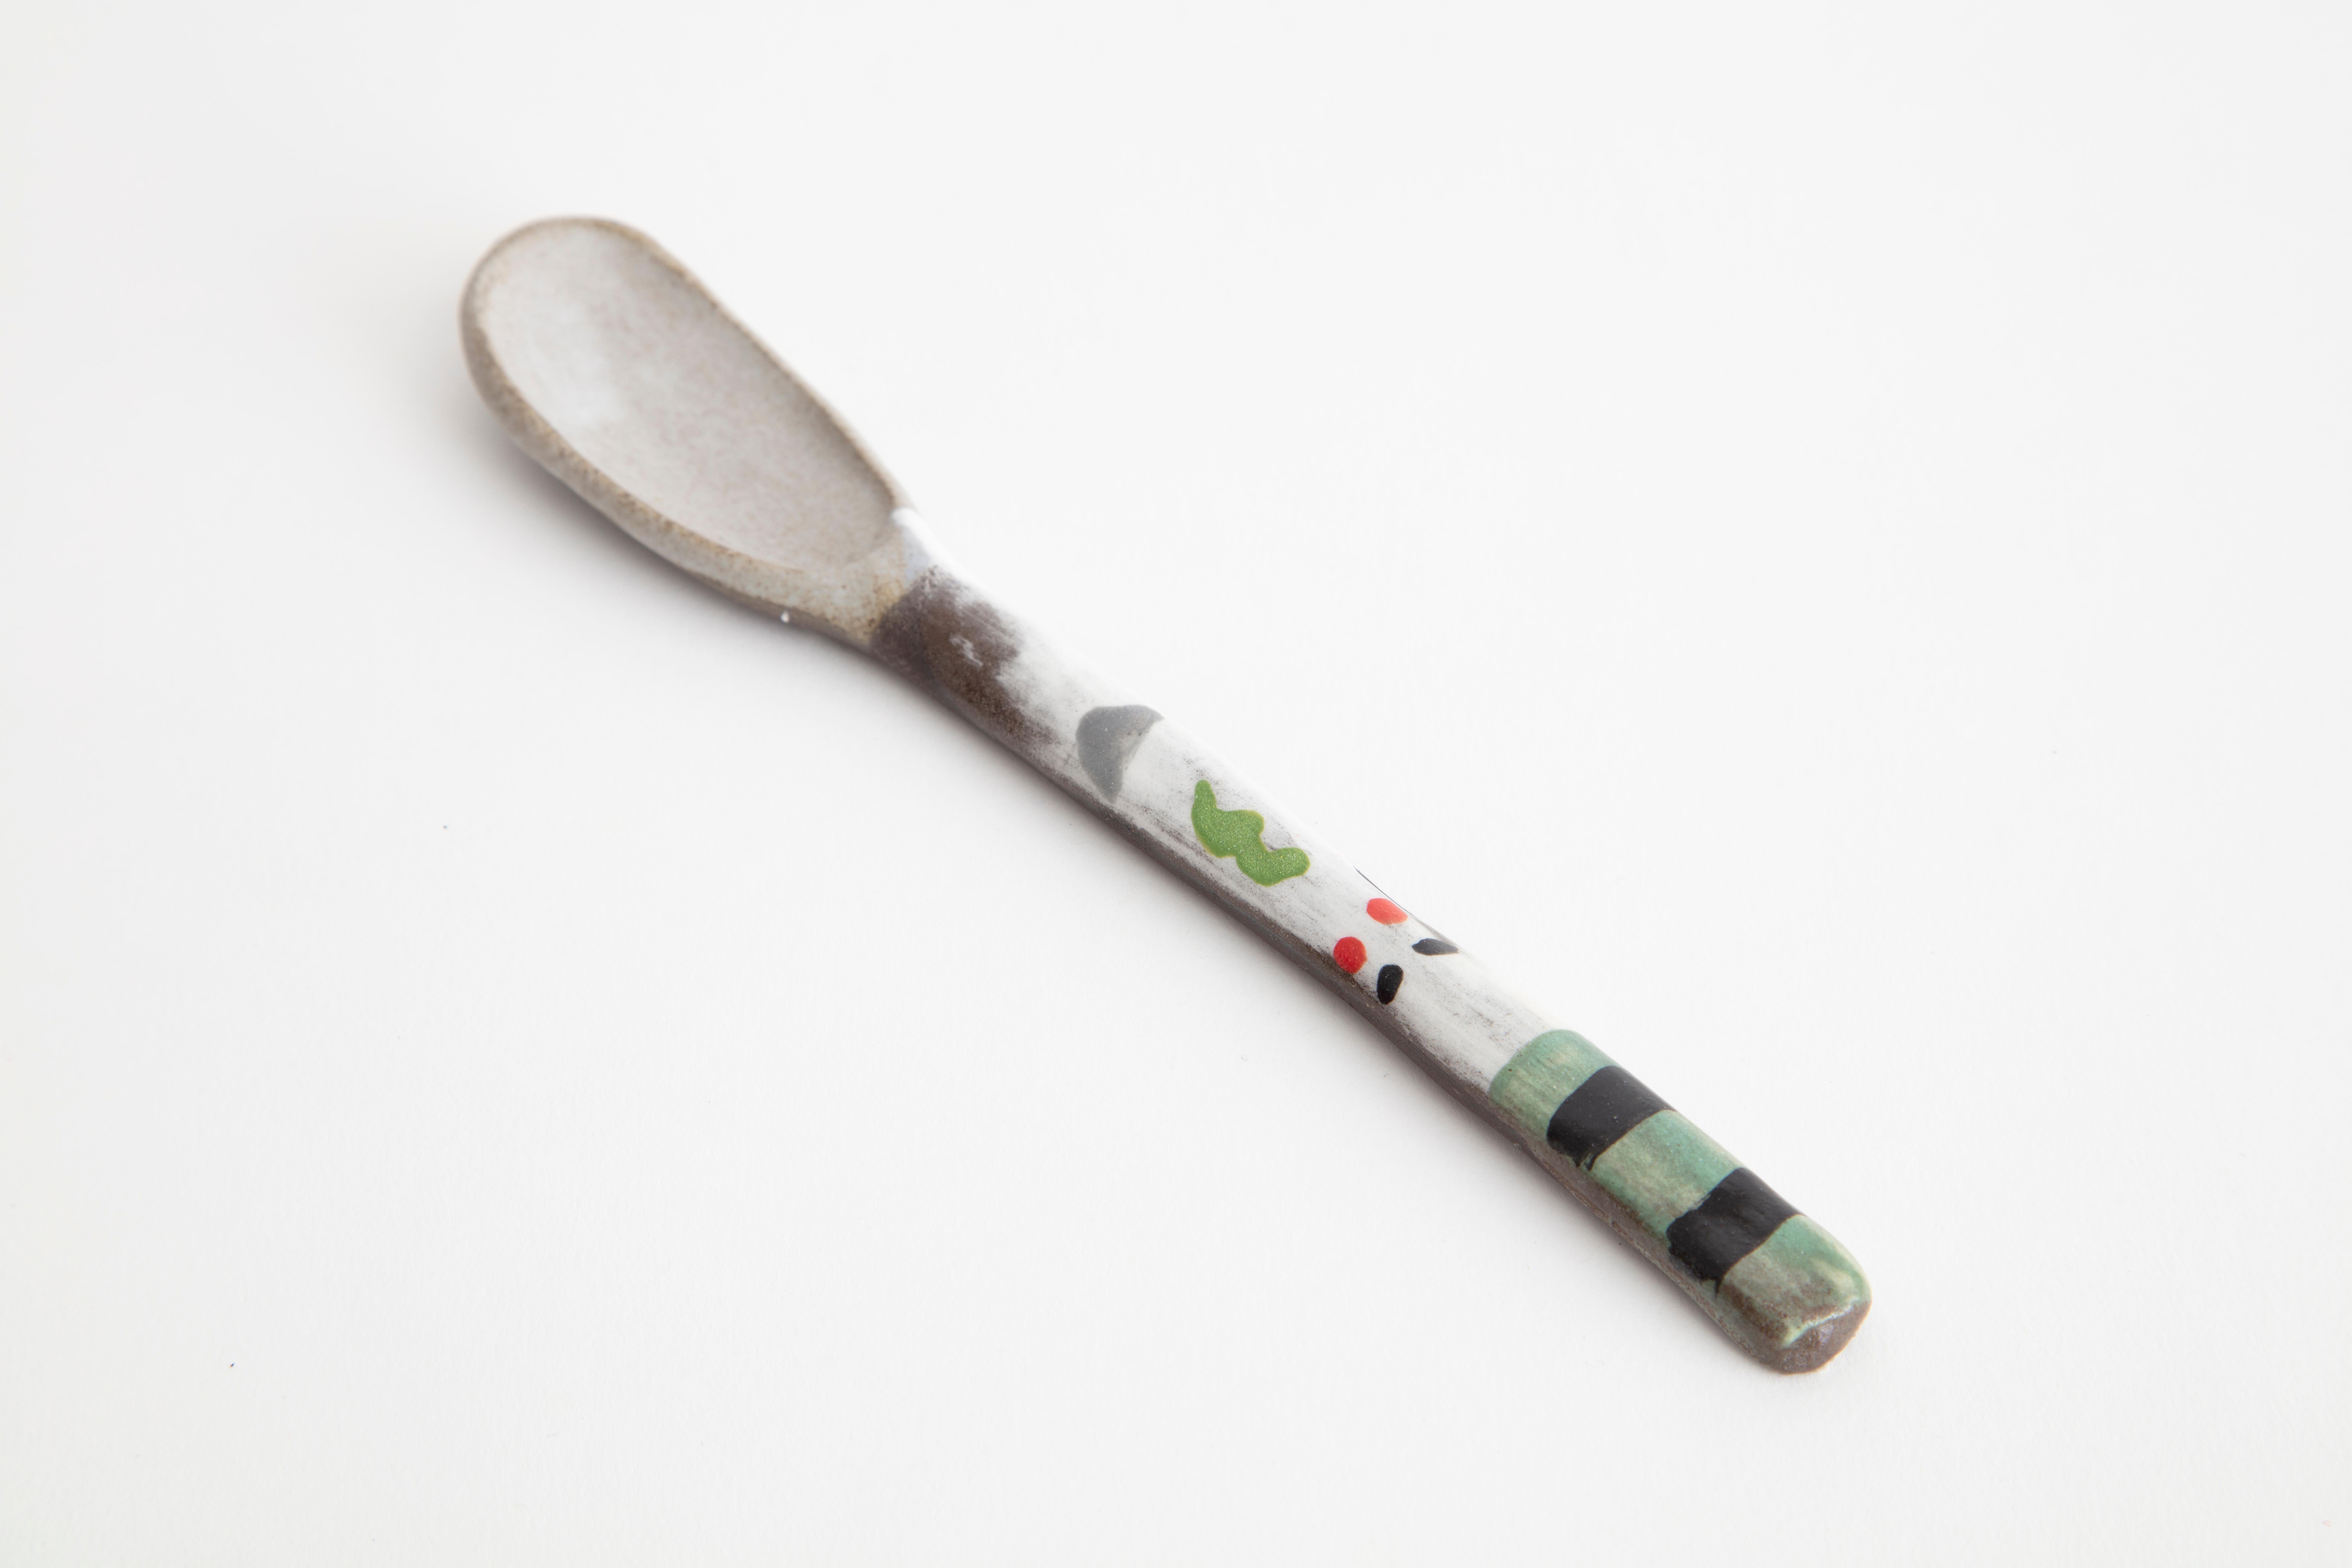 Part of the surrealist-inspired show the dinner guests, each ceramic smiley spoon is hand painted with anthropomorphic shapes and playful, brightly-colored patterns. 1 of 9.

Handmade by Shino Takeda
Materials: Hand painted ceramic
Dimensions: H